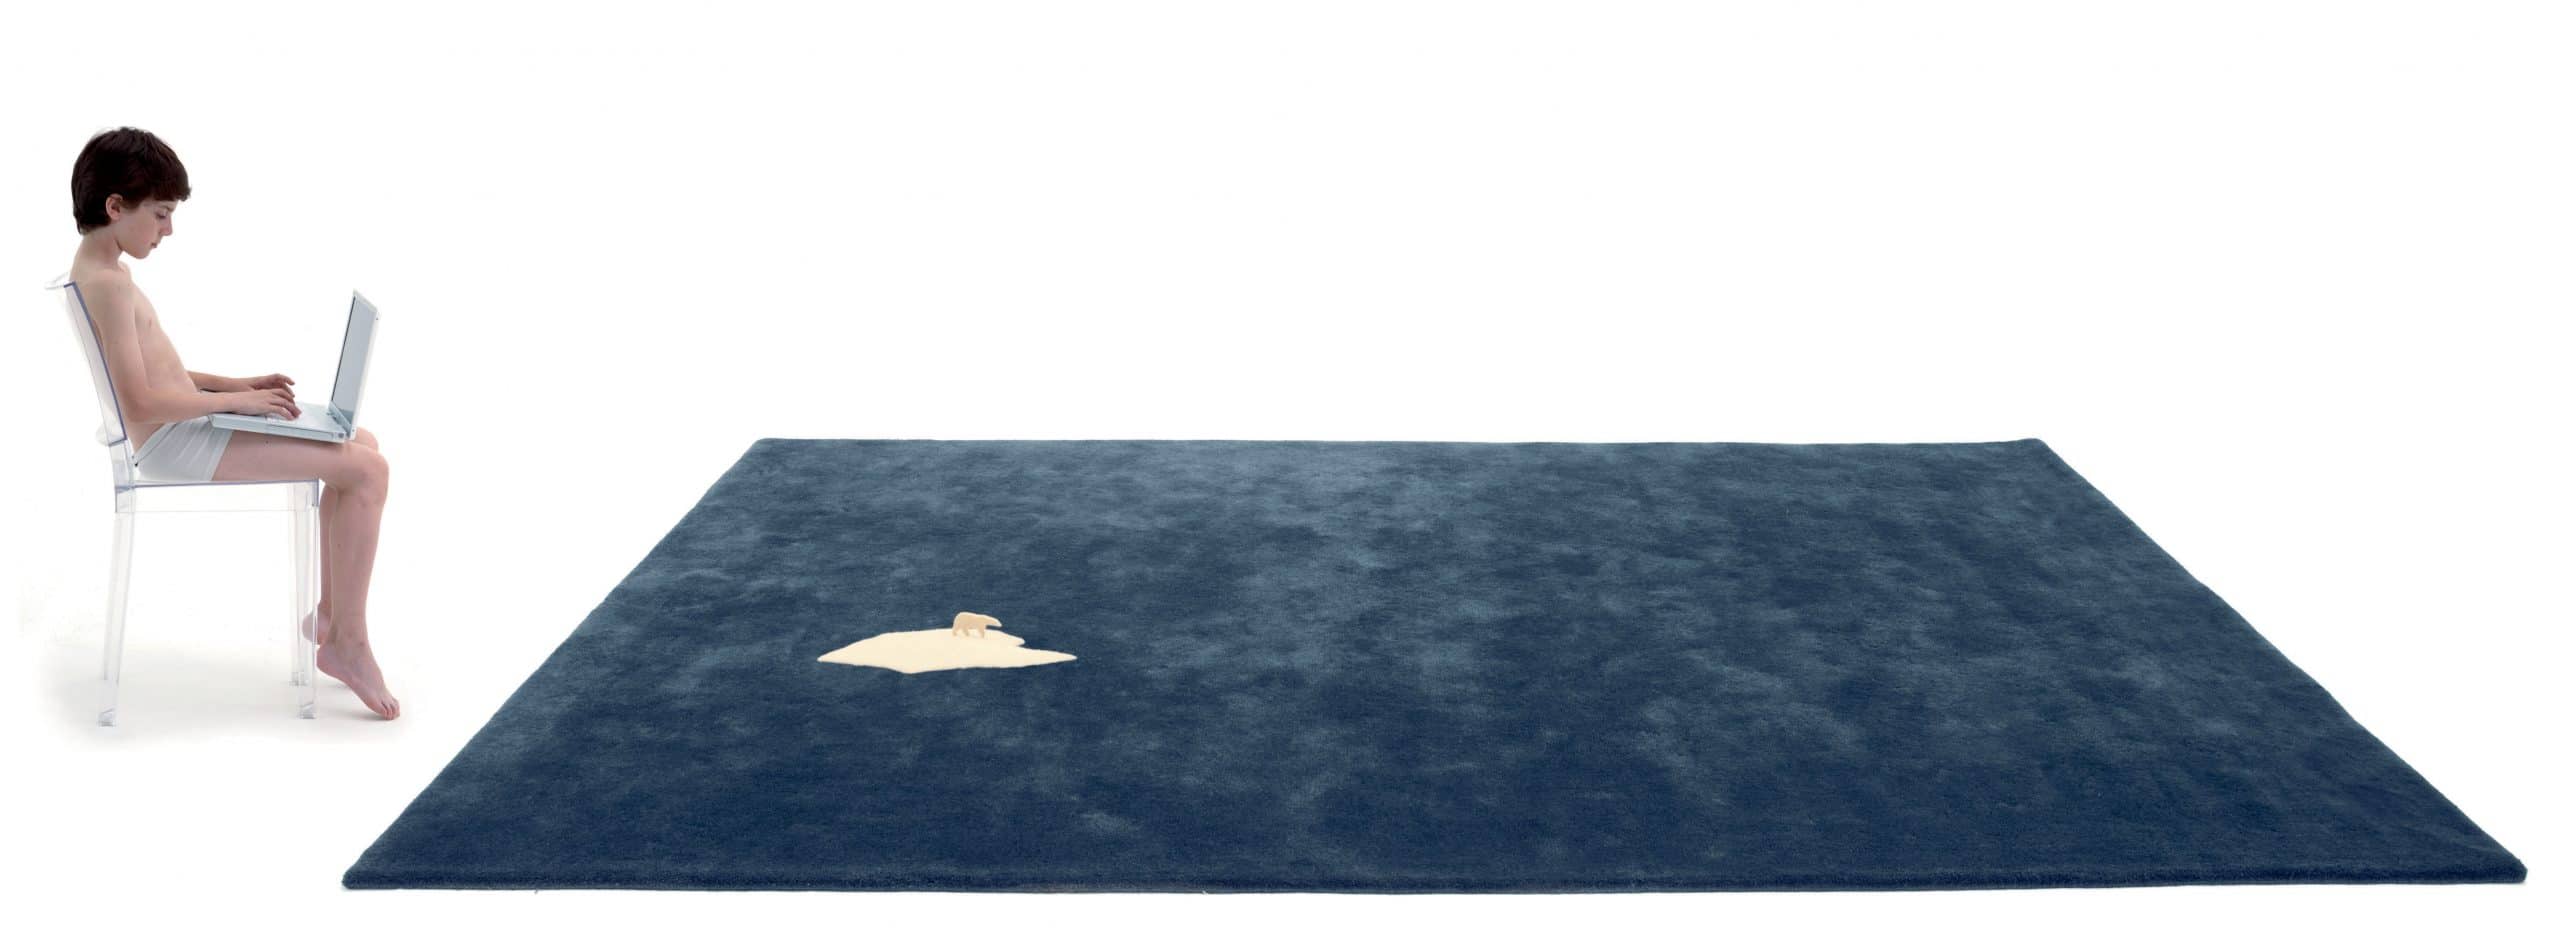 Global Warming rug by NEL Collective for nanimarquina. Image courtesy of nanimarquina.